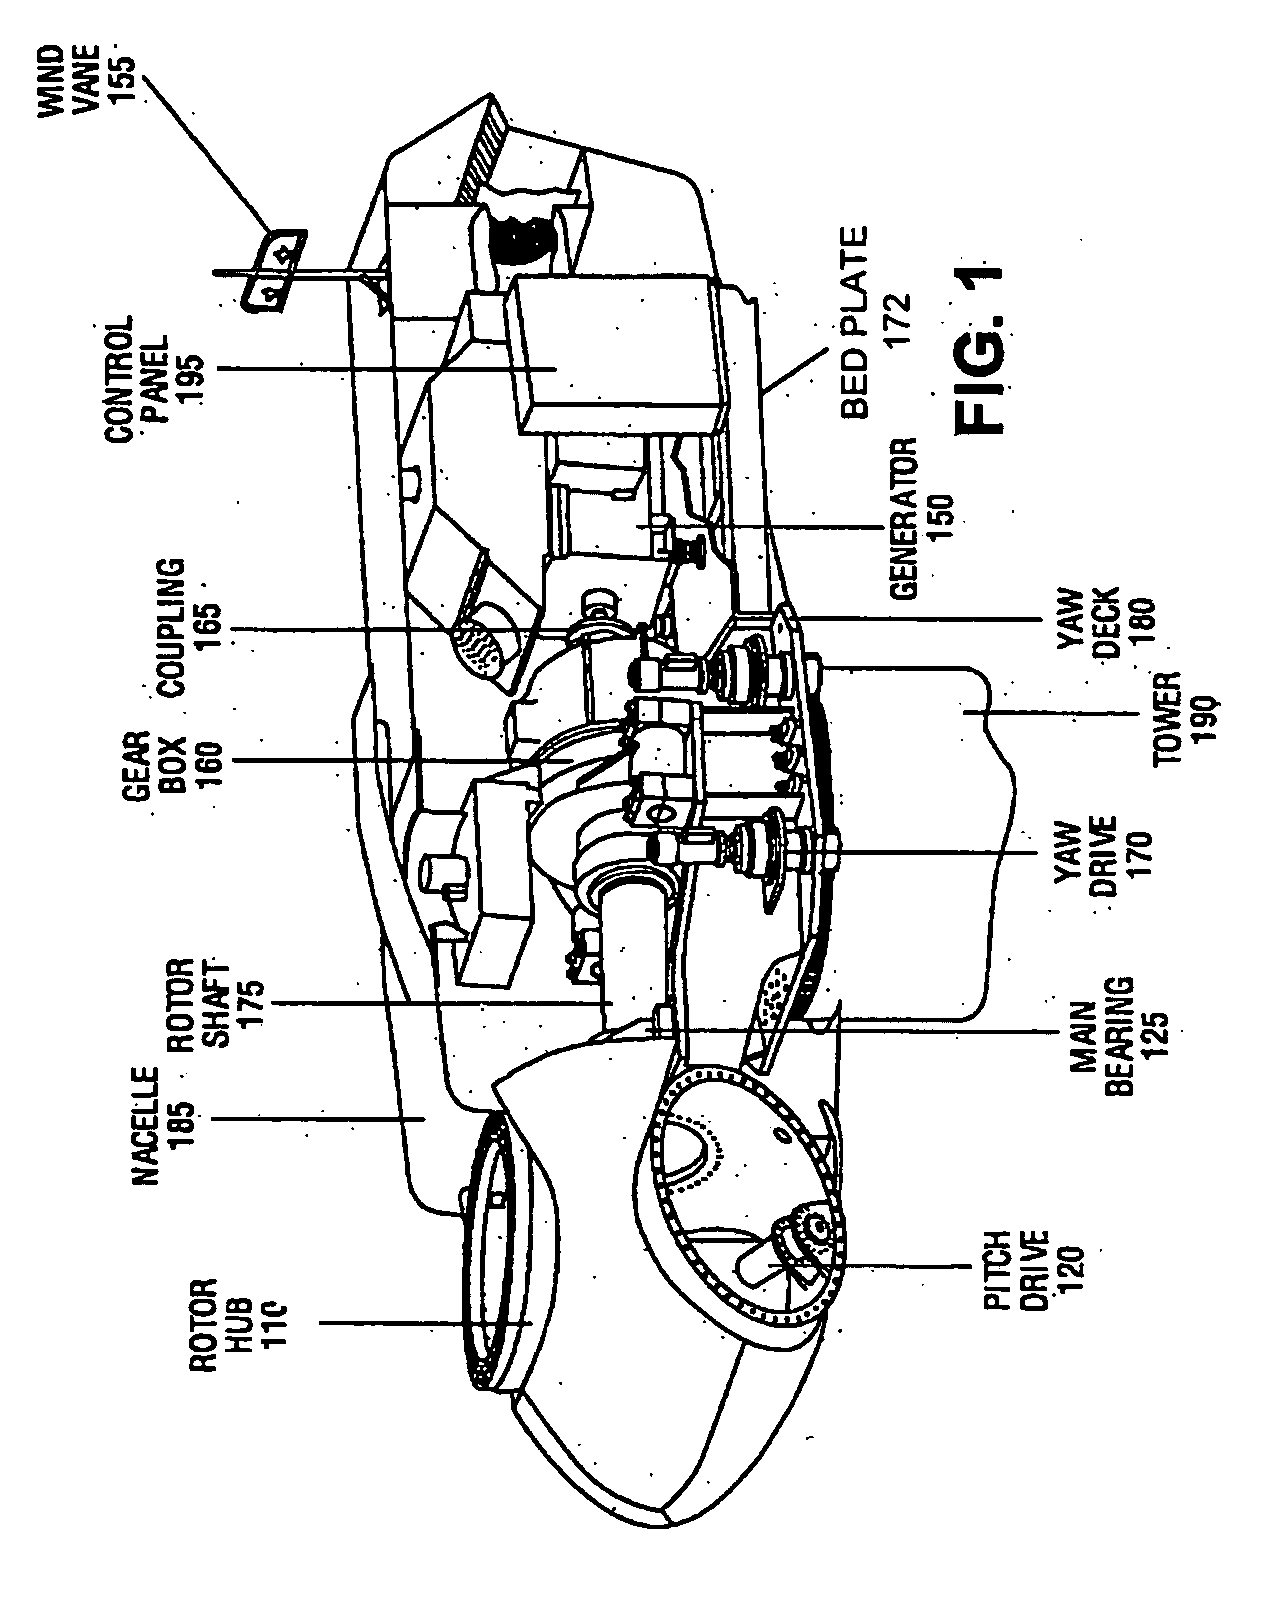 Methods and apparatuses for wind turbine fatigue load measurement and assessment